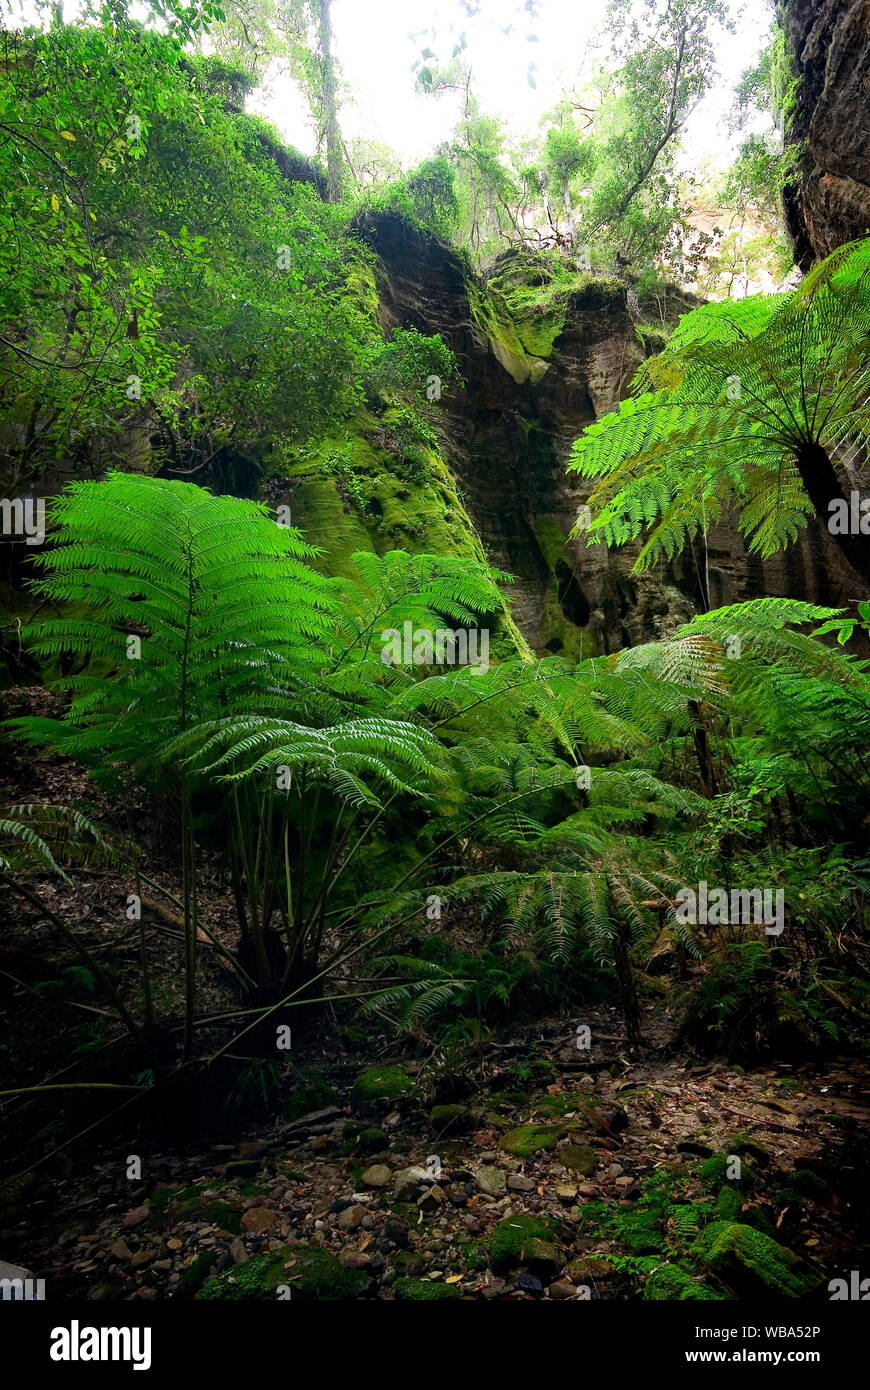 King ferns (Angiopteris evecta), in Ward’s Canyon. Carnarvon Gorge Section, Carnarvon National Park, Central Queensland, Australia Stock Photo